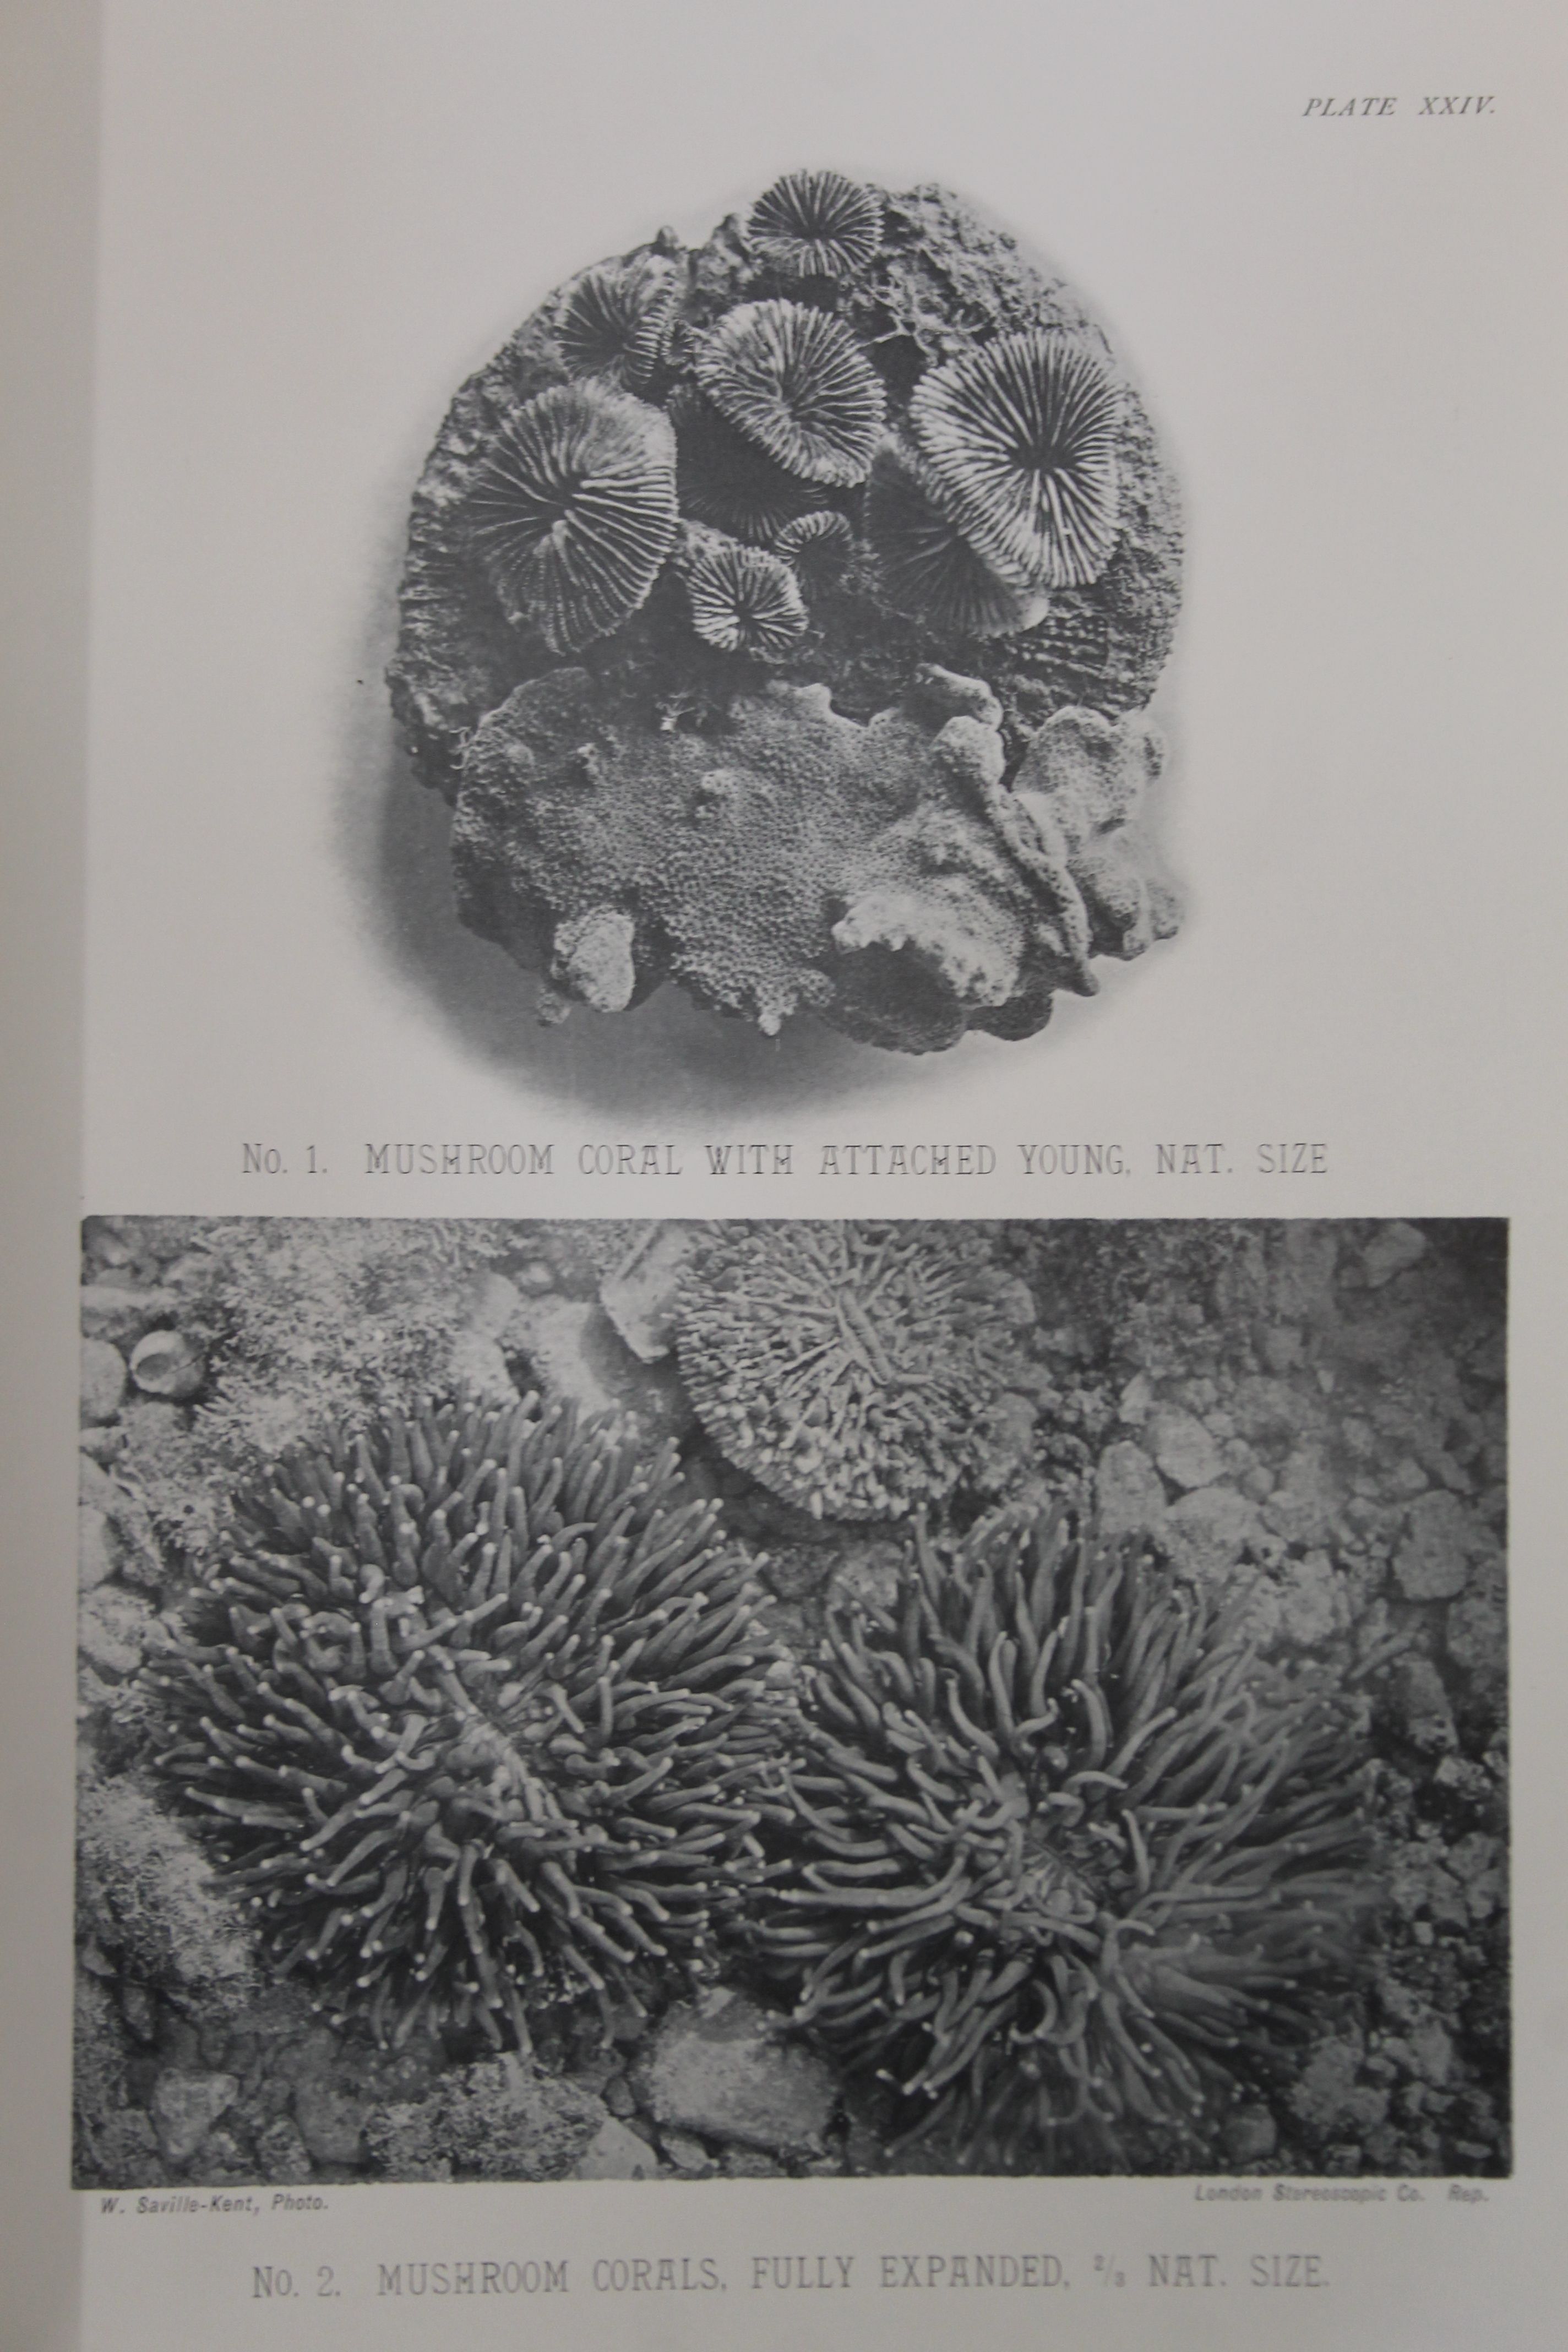 Saville-Kent, (William), The Great Barrier Reef of Australia; Its Products and Potentialities, - Image 9 of 9